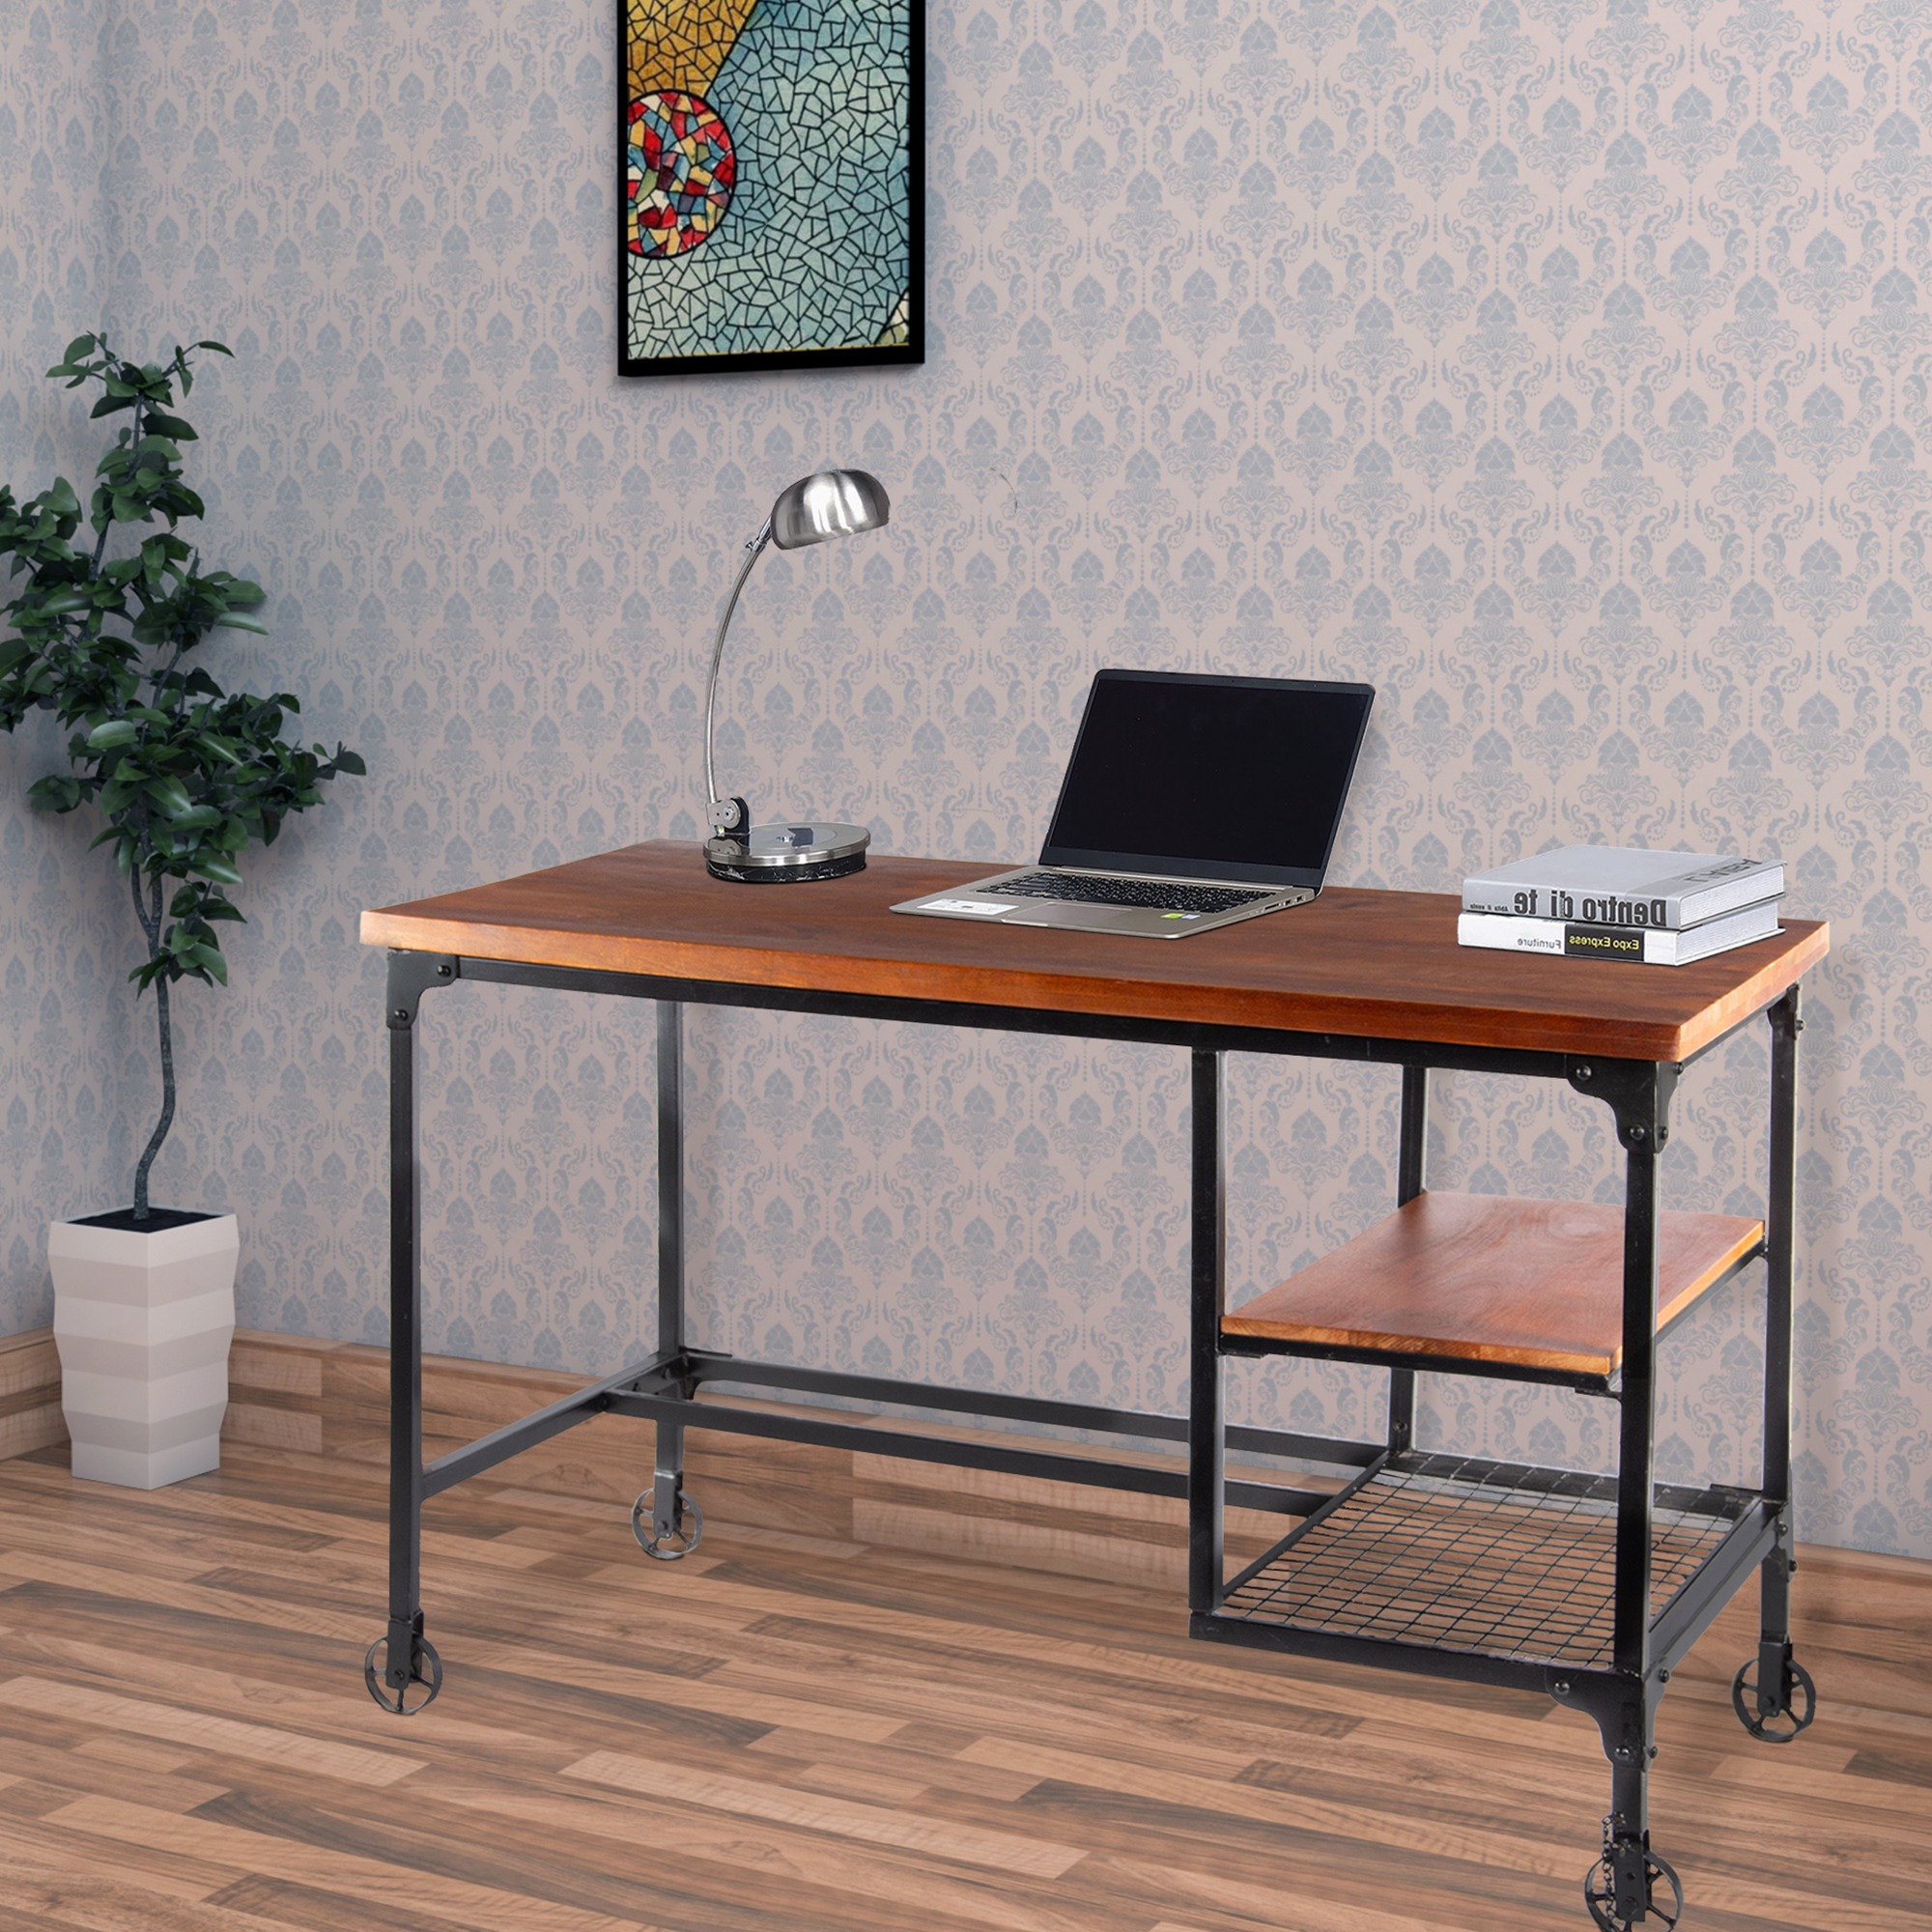 Wooden Rectangular Office Tables Double Side Storage